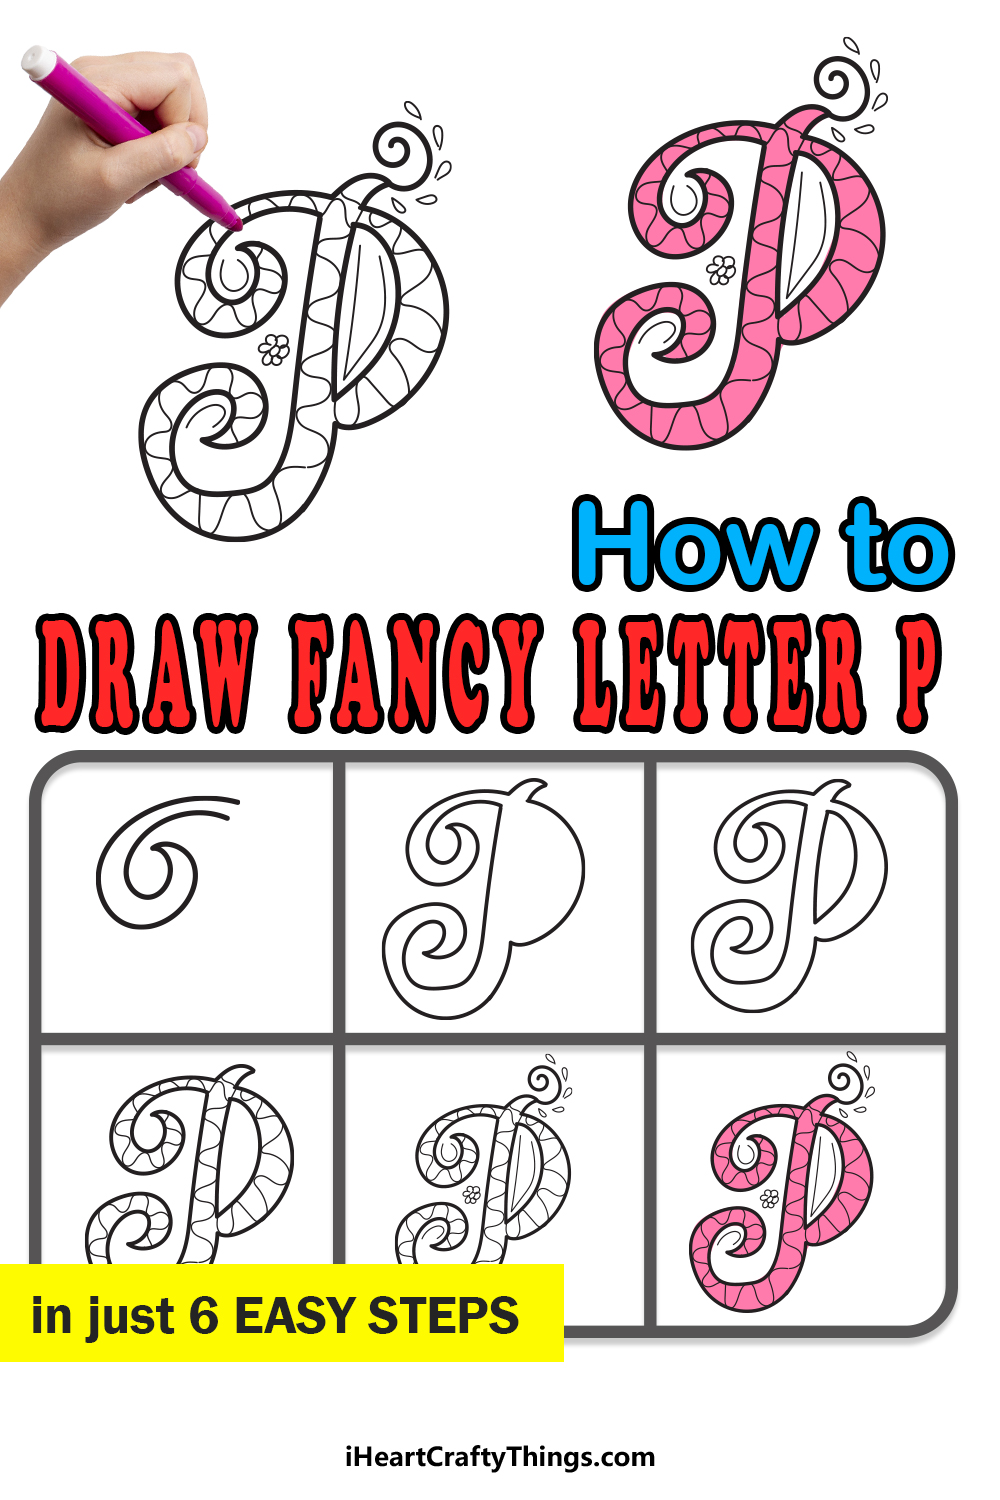 How To Draw Your Own Fancy P step by step guide